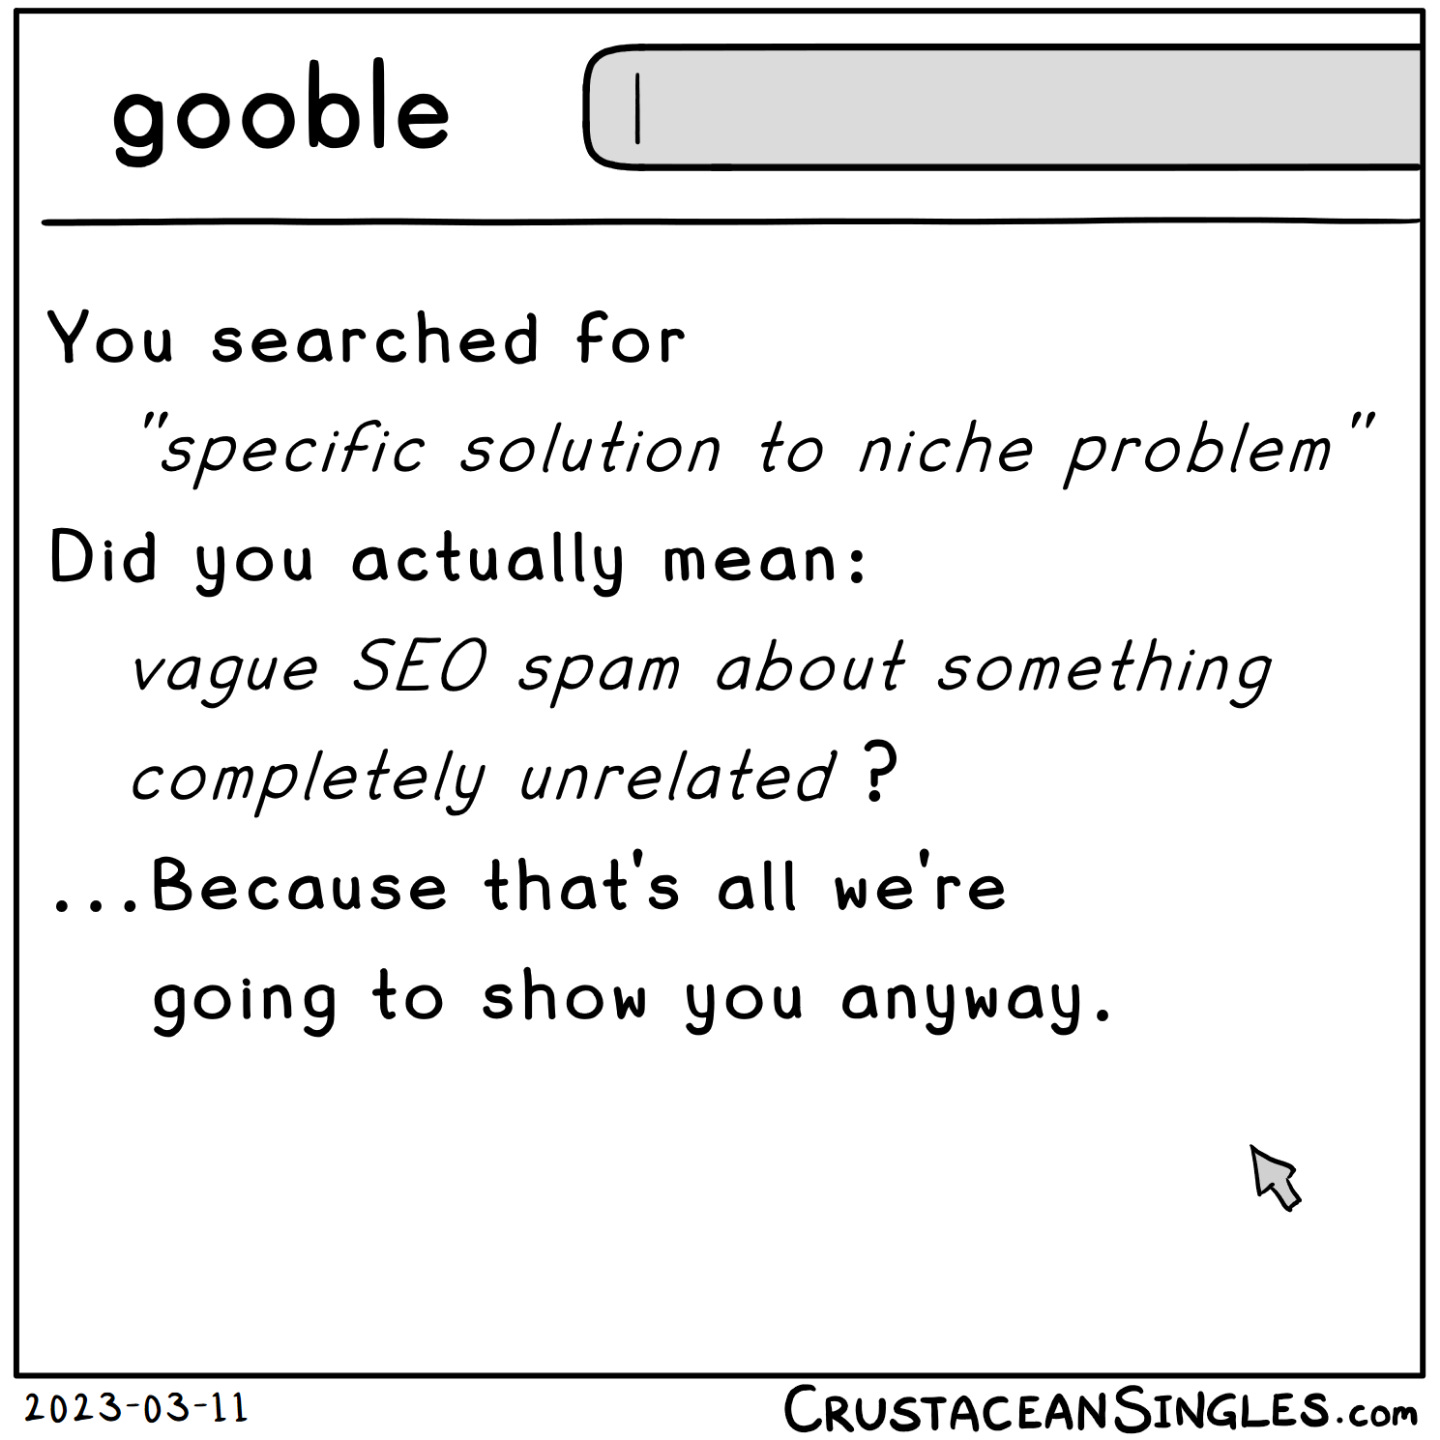 Pictured: a web search on "gooble" has returned "results" as follows: "You searched for 'specific solution to niche problem' / Did you actually mean: 'vague SEO spam about something completely unrelated' ? ...Because that's all we're going to show you anyway."